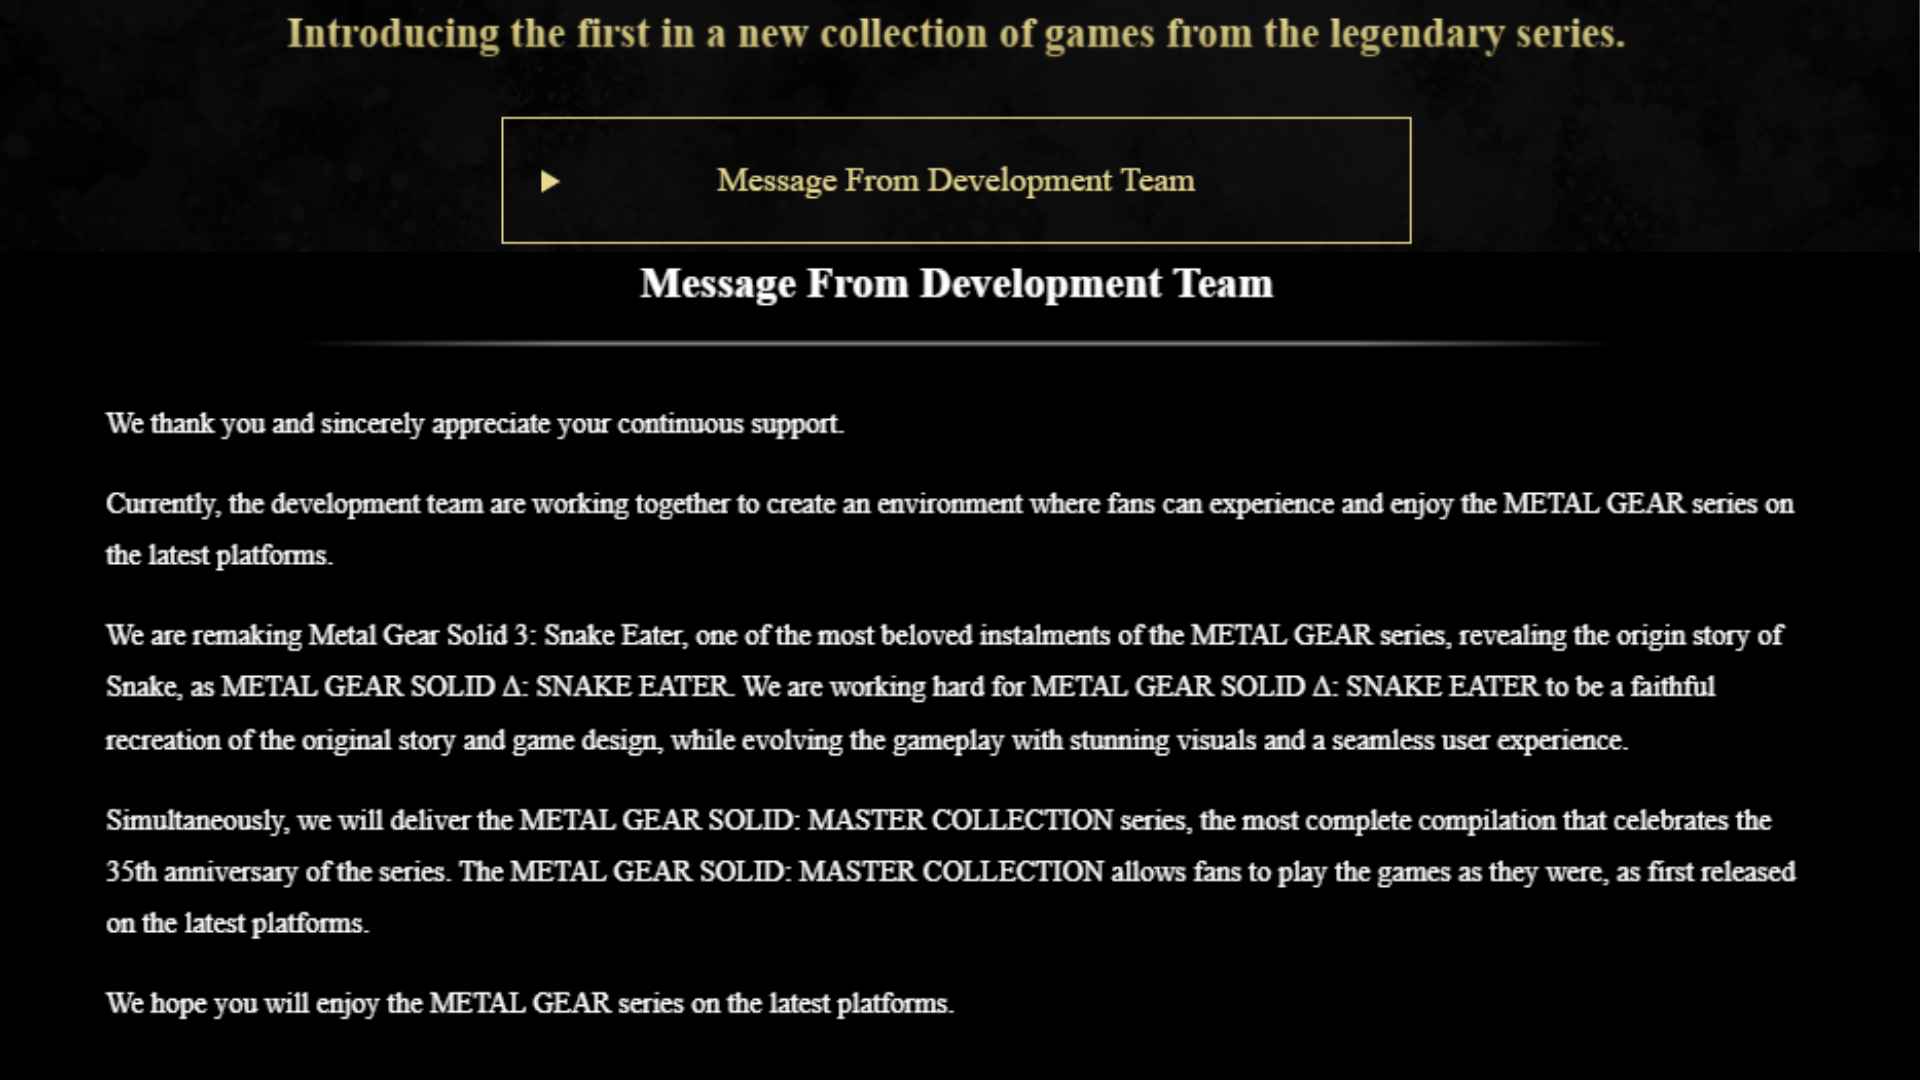 The Master Collection series is most likely going to get a Vol. 2, possibly with a Metal Gear Solid 4 remaster. | Source: Konami